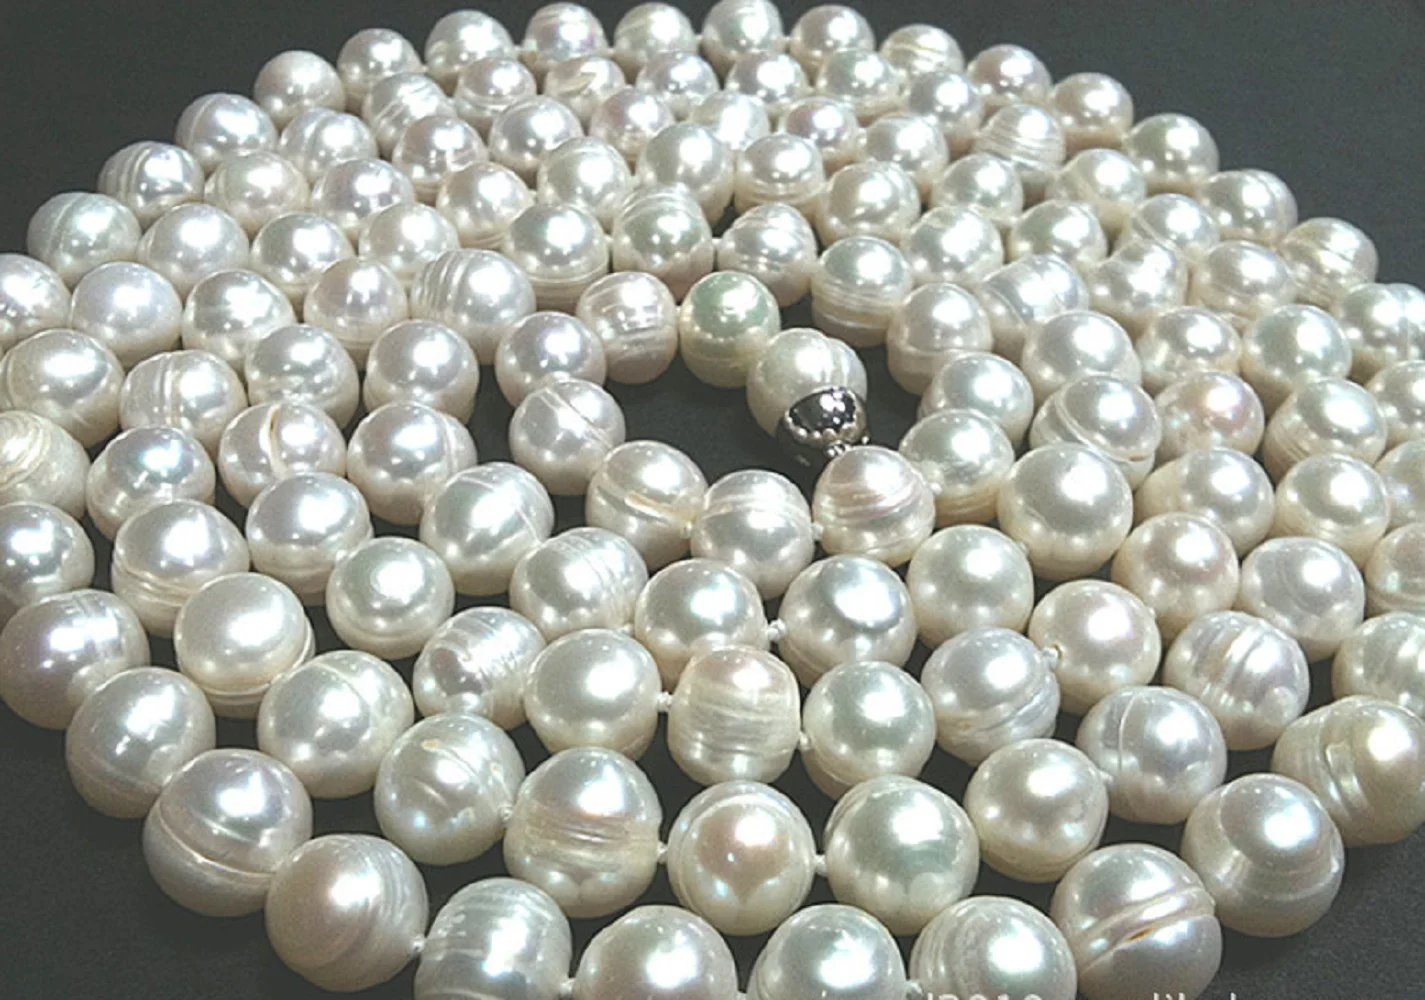 

GENUINE HUGE 11-12MM NATURAL WHITE BAROQUE PEARL NECKLACE 40cm 45cm 50cm 55cm 60cm 70cm 90cm 110cm 130cm